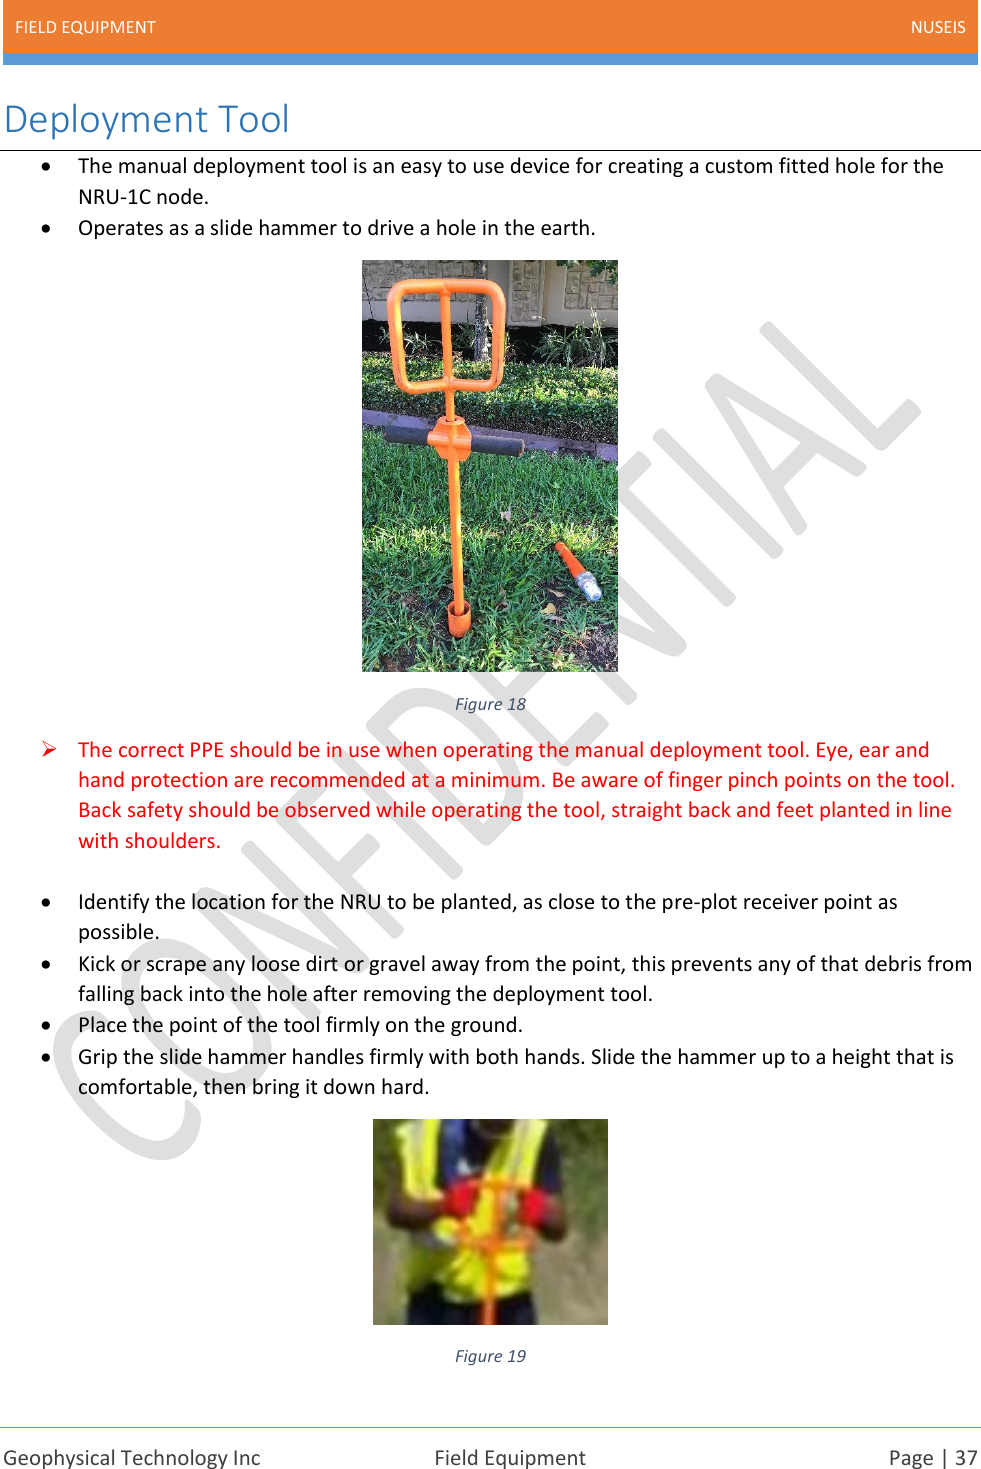 FIELD EQUIPMENT NUSEIS    Geophysical Technology Inc  Field Equipment  Page | 37  Deployment Tool • The manual deployment tool is an easy to use device for creating a custom fitted hole for the NRU-1C node.  • Operates as a slide hammer to drive a hole in the earth.  Figure 18 ➢ The correct PPE should be in use when operating the manual deployment tool. Eye, ear and hand protection are recommended at a minimum. Be aware of finger pinch points on the tool. Back safety should be observed while operating the tool, straight back and feet planted in line with shoulders.  • Identify the location for the NRU to be planted, as close to the pre-plot receiver point as possible. • Kick or scrape any loose dirt or gravel away from the point, this prevents any of that debris from falling back into the hole after removing the deployment tool. • Place the point of the tool firmly on the ground.  • Grip the slide hammer handles firmly with both hands. Slide the hammer up to a height that is comfortable, then bring it down hard.   Figure 19 